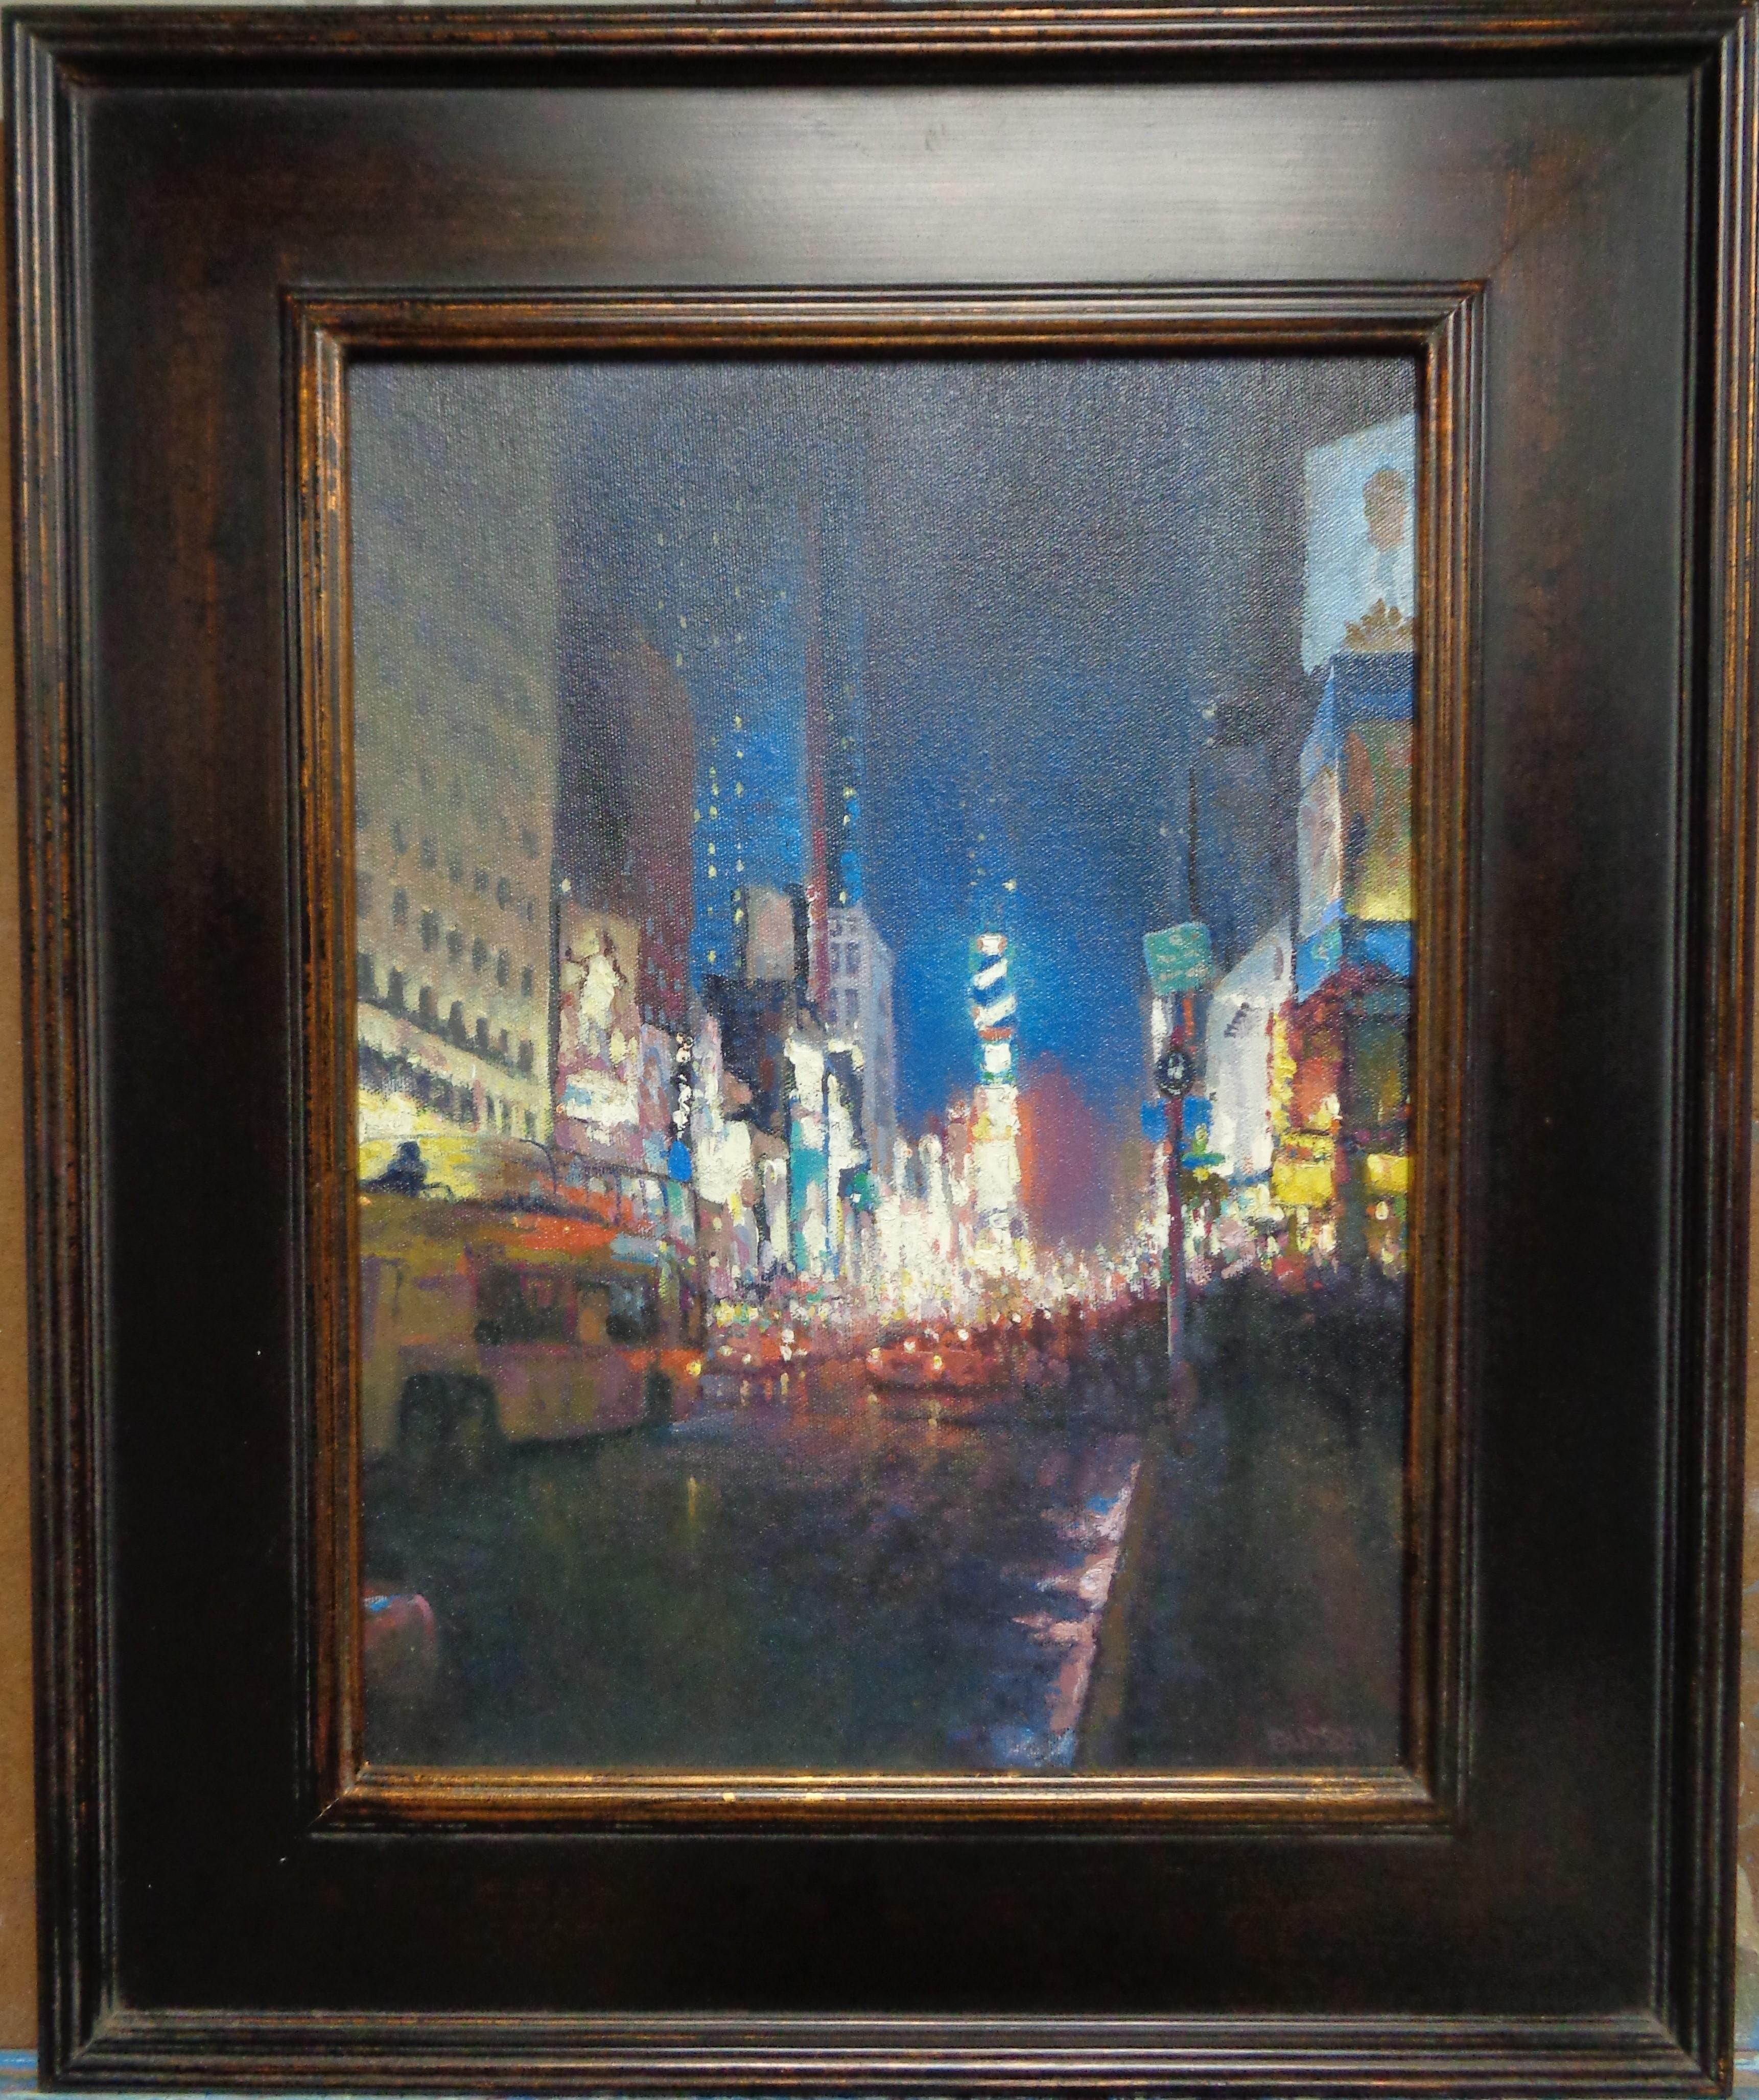 The Evening Show, Times Square
oil/panel
16 x 12 image unframed, 22.5 x 18.5 framed, is an oil painting on canvas by award winning contemporary artist Michael Budden that showcases the bustling night life in NYC Times Square. This was one of my